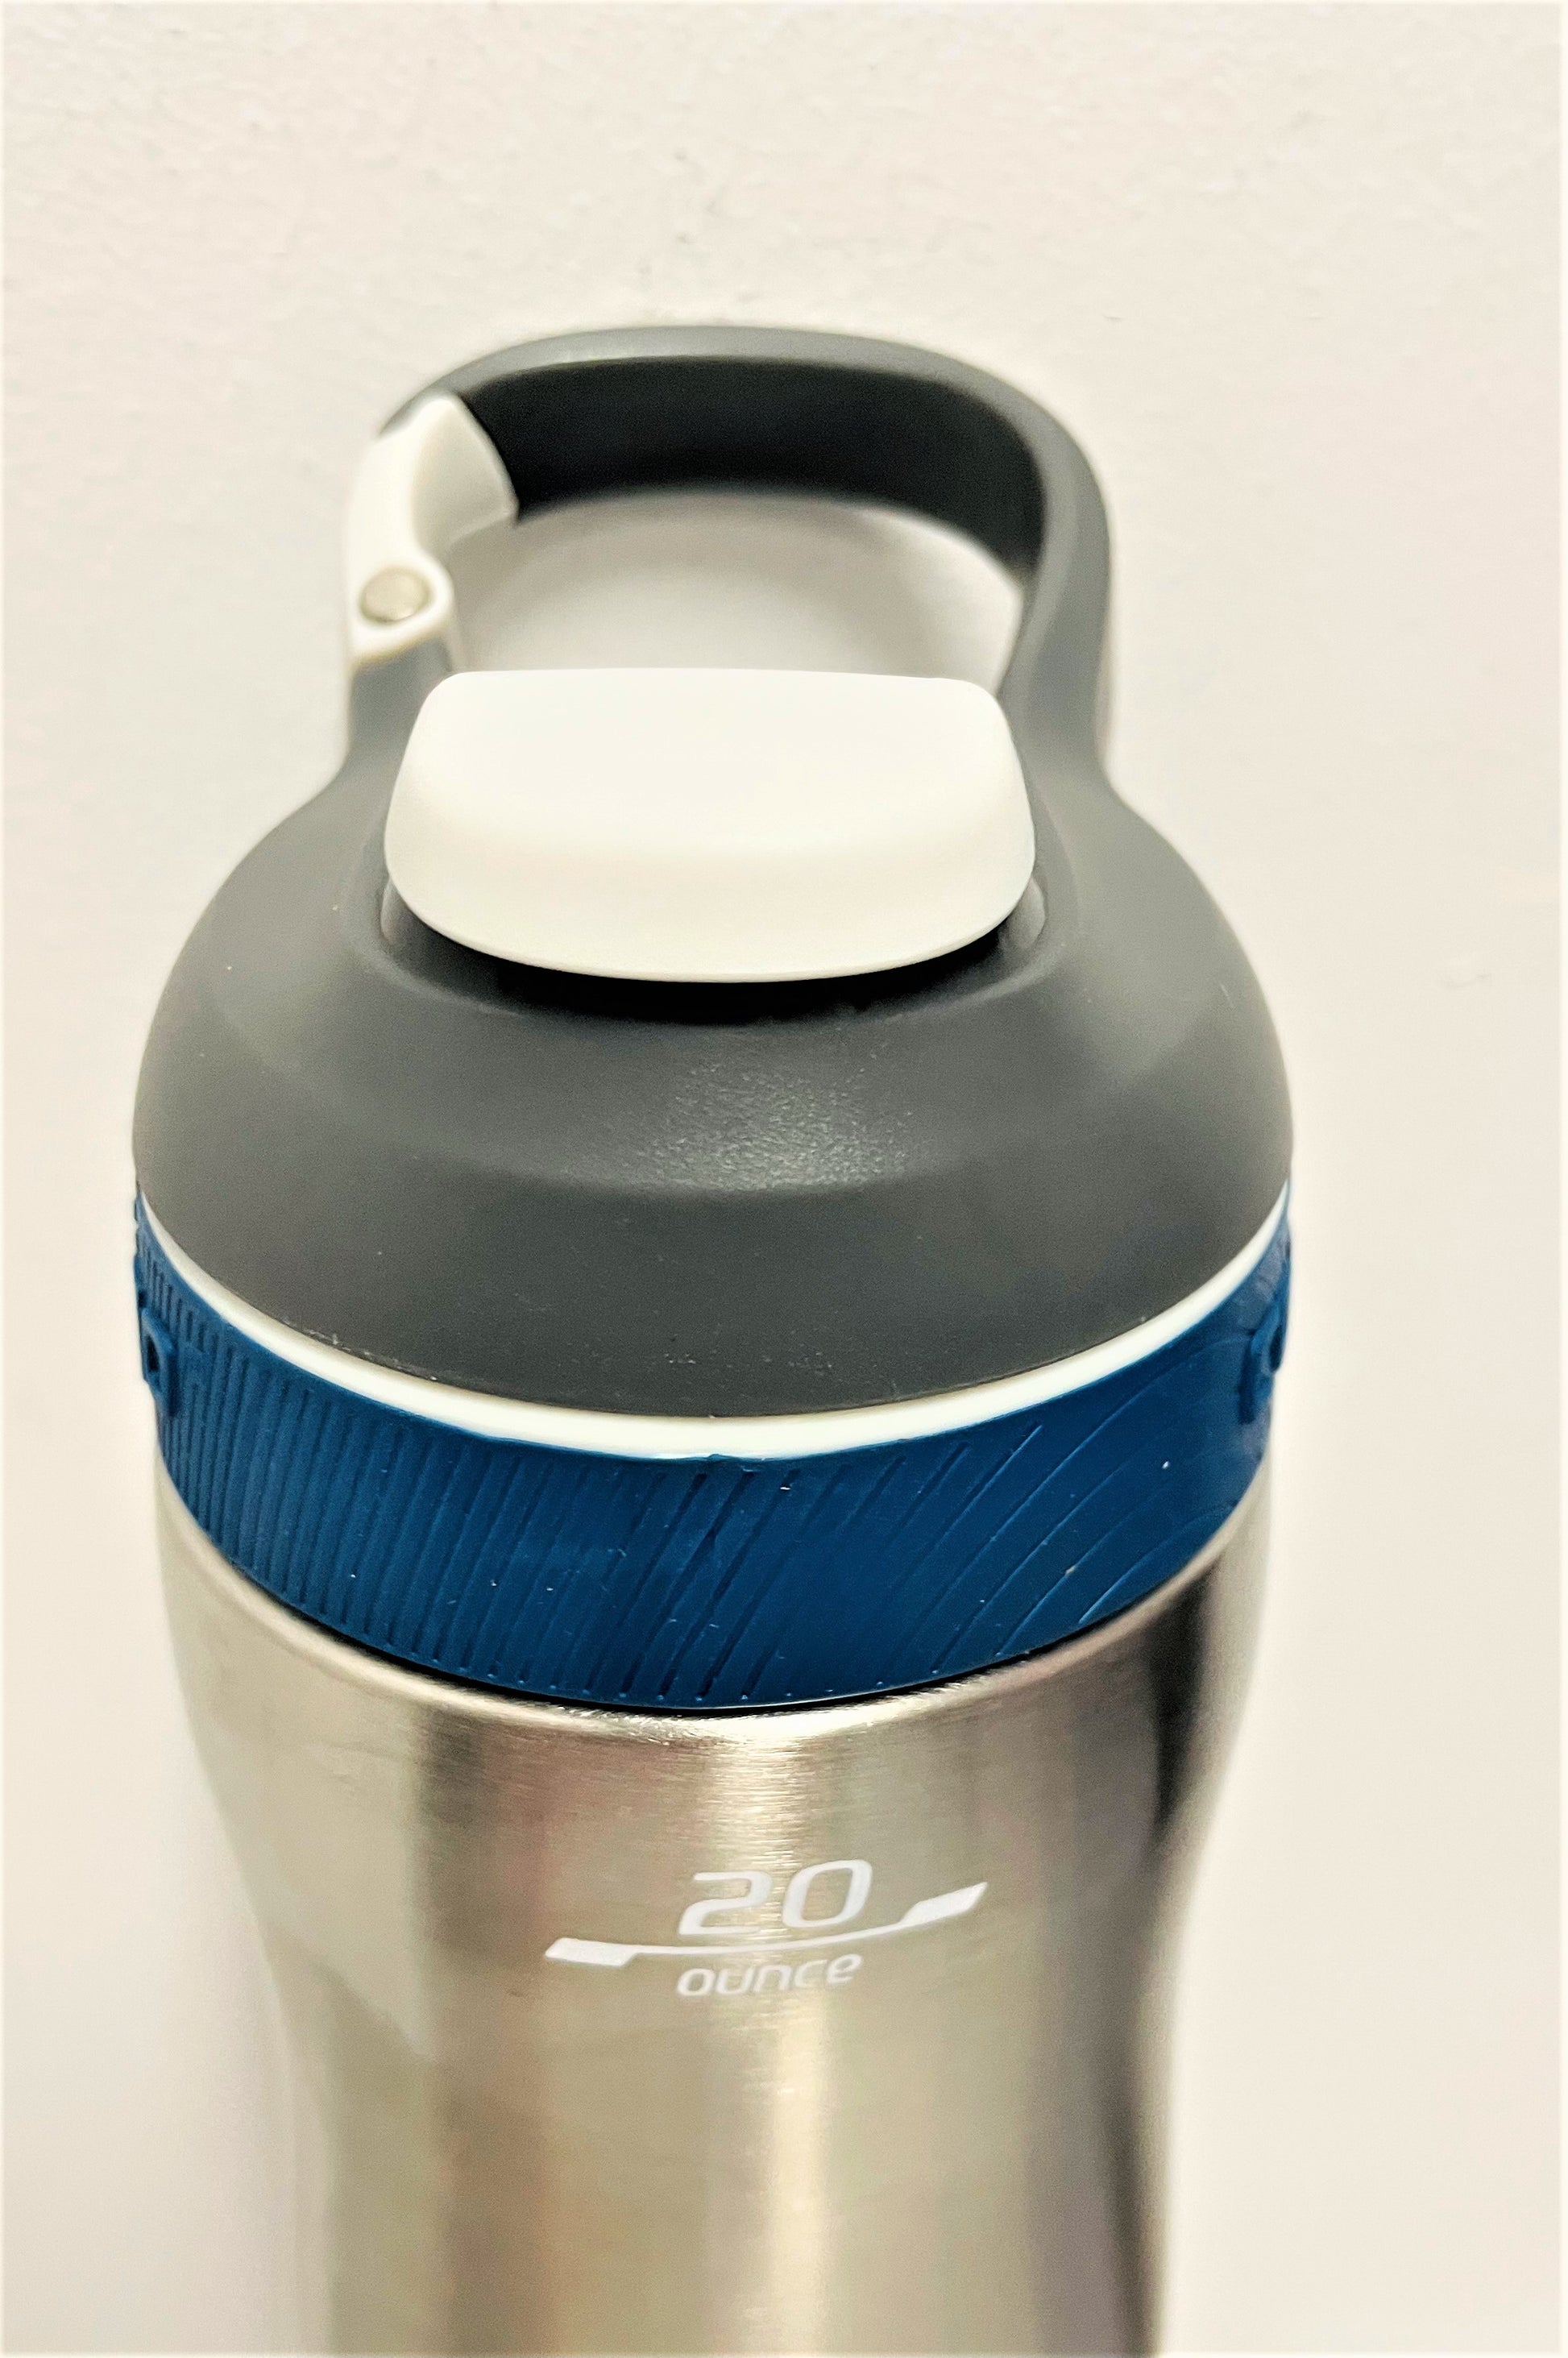 Contigo - 'Courtland' Double wall, insulated Stainless steel Sports Bottle 591ml.